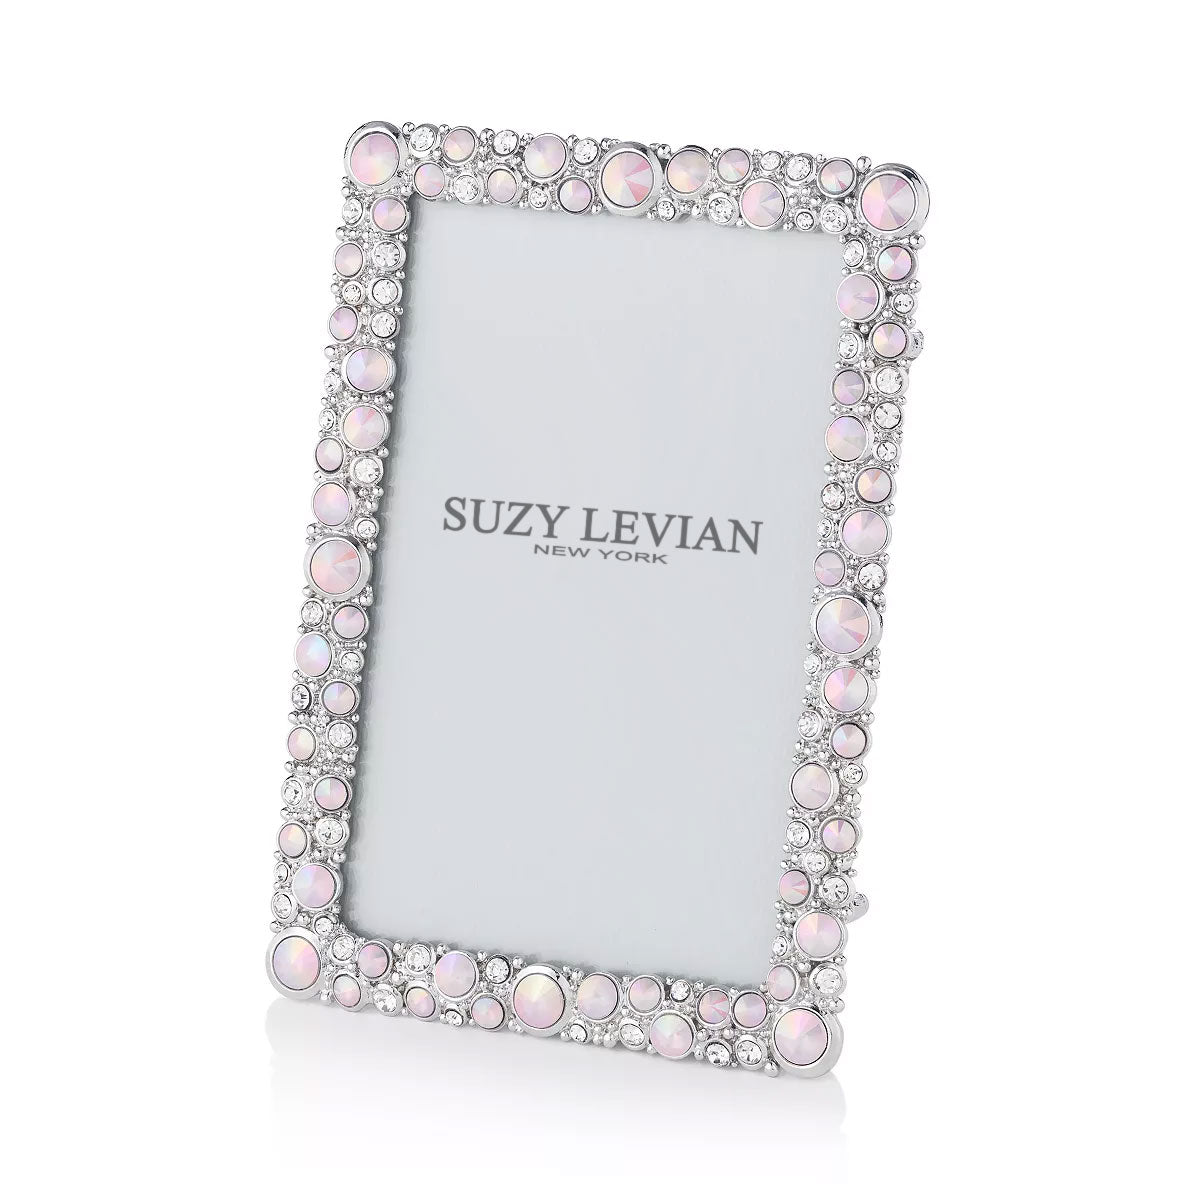 Suzy Levian New York Crystal Encrusted Picture Frame